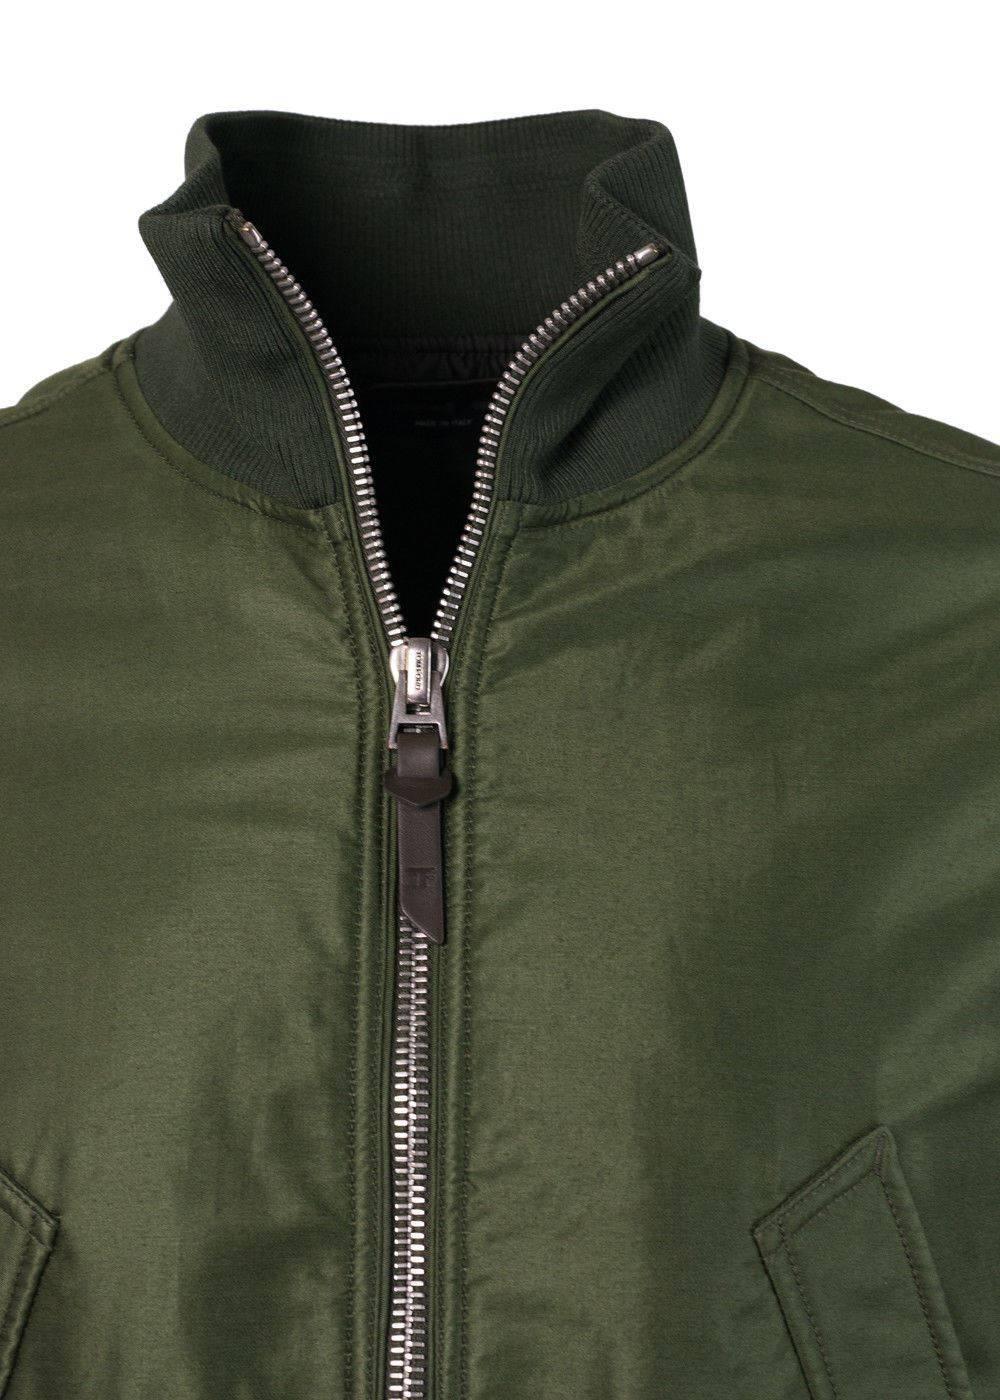 Brand New Tom Ford Blouson Sport Jacket
Original Tags & Hanger Included
Retails in Stores & Online for $3390
Men's Size EUR 52 / US 42 Fits True to Size

Tom Ford's Green Blouson Sports Jacket is undoubtedly this season's essential. This rich hunter